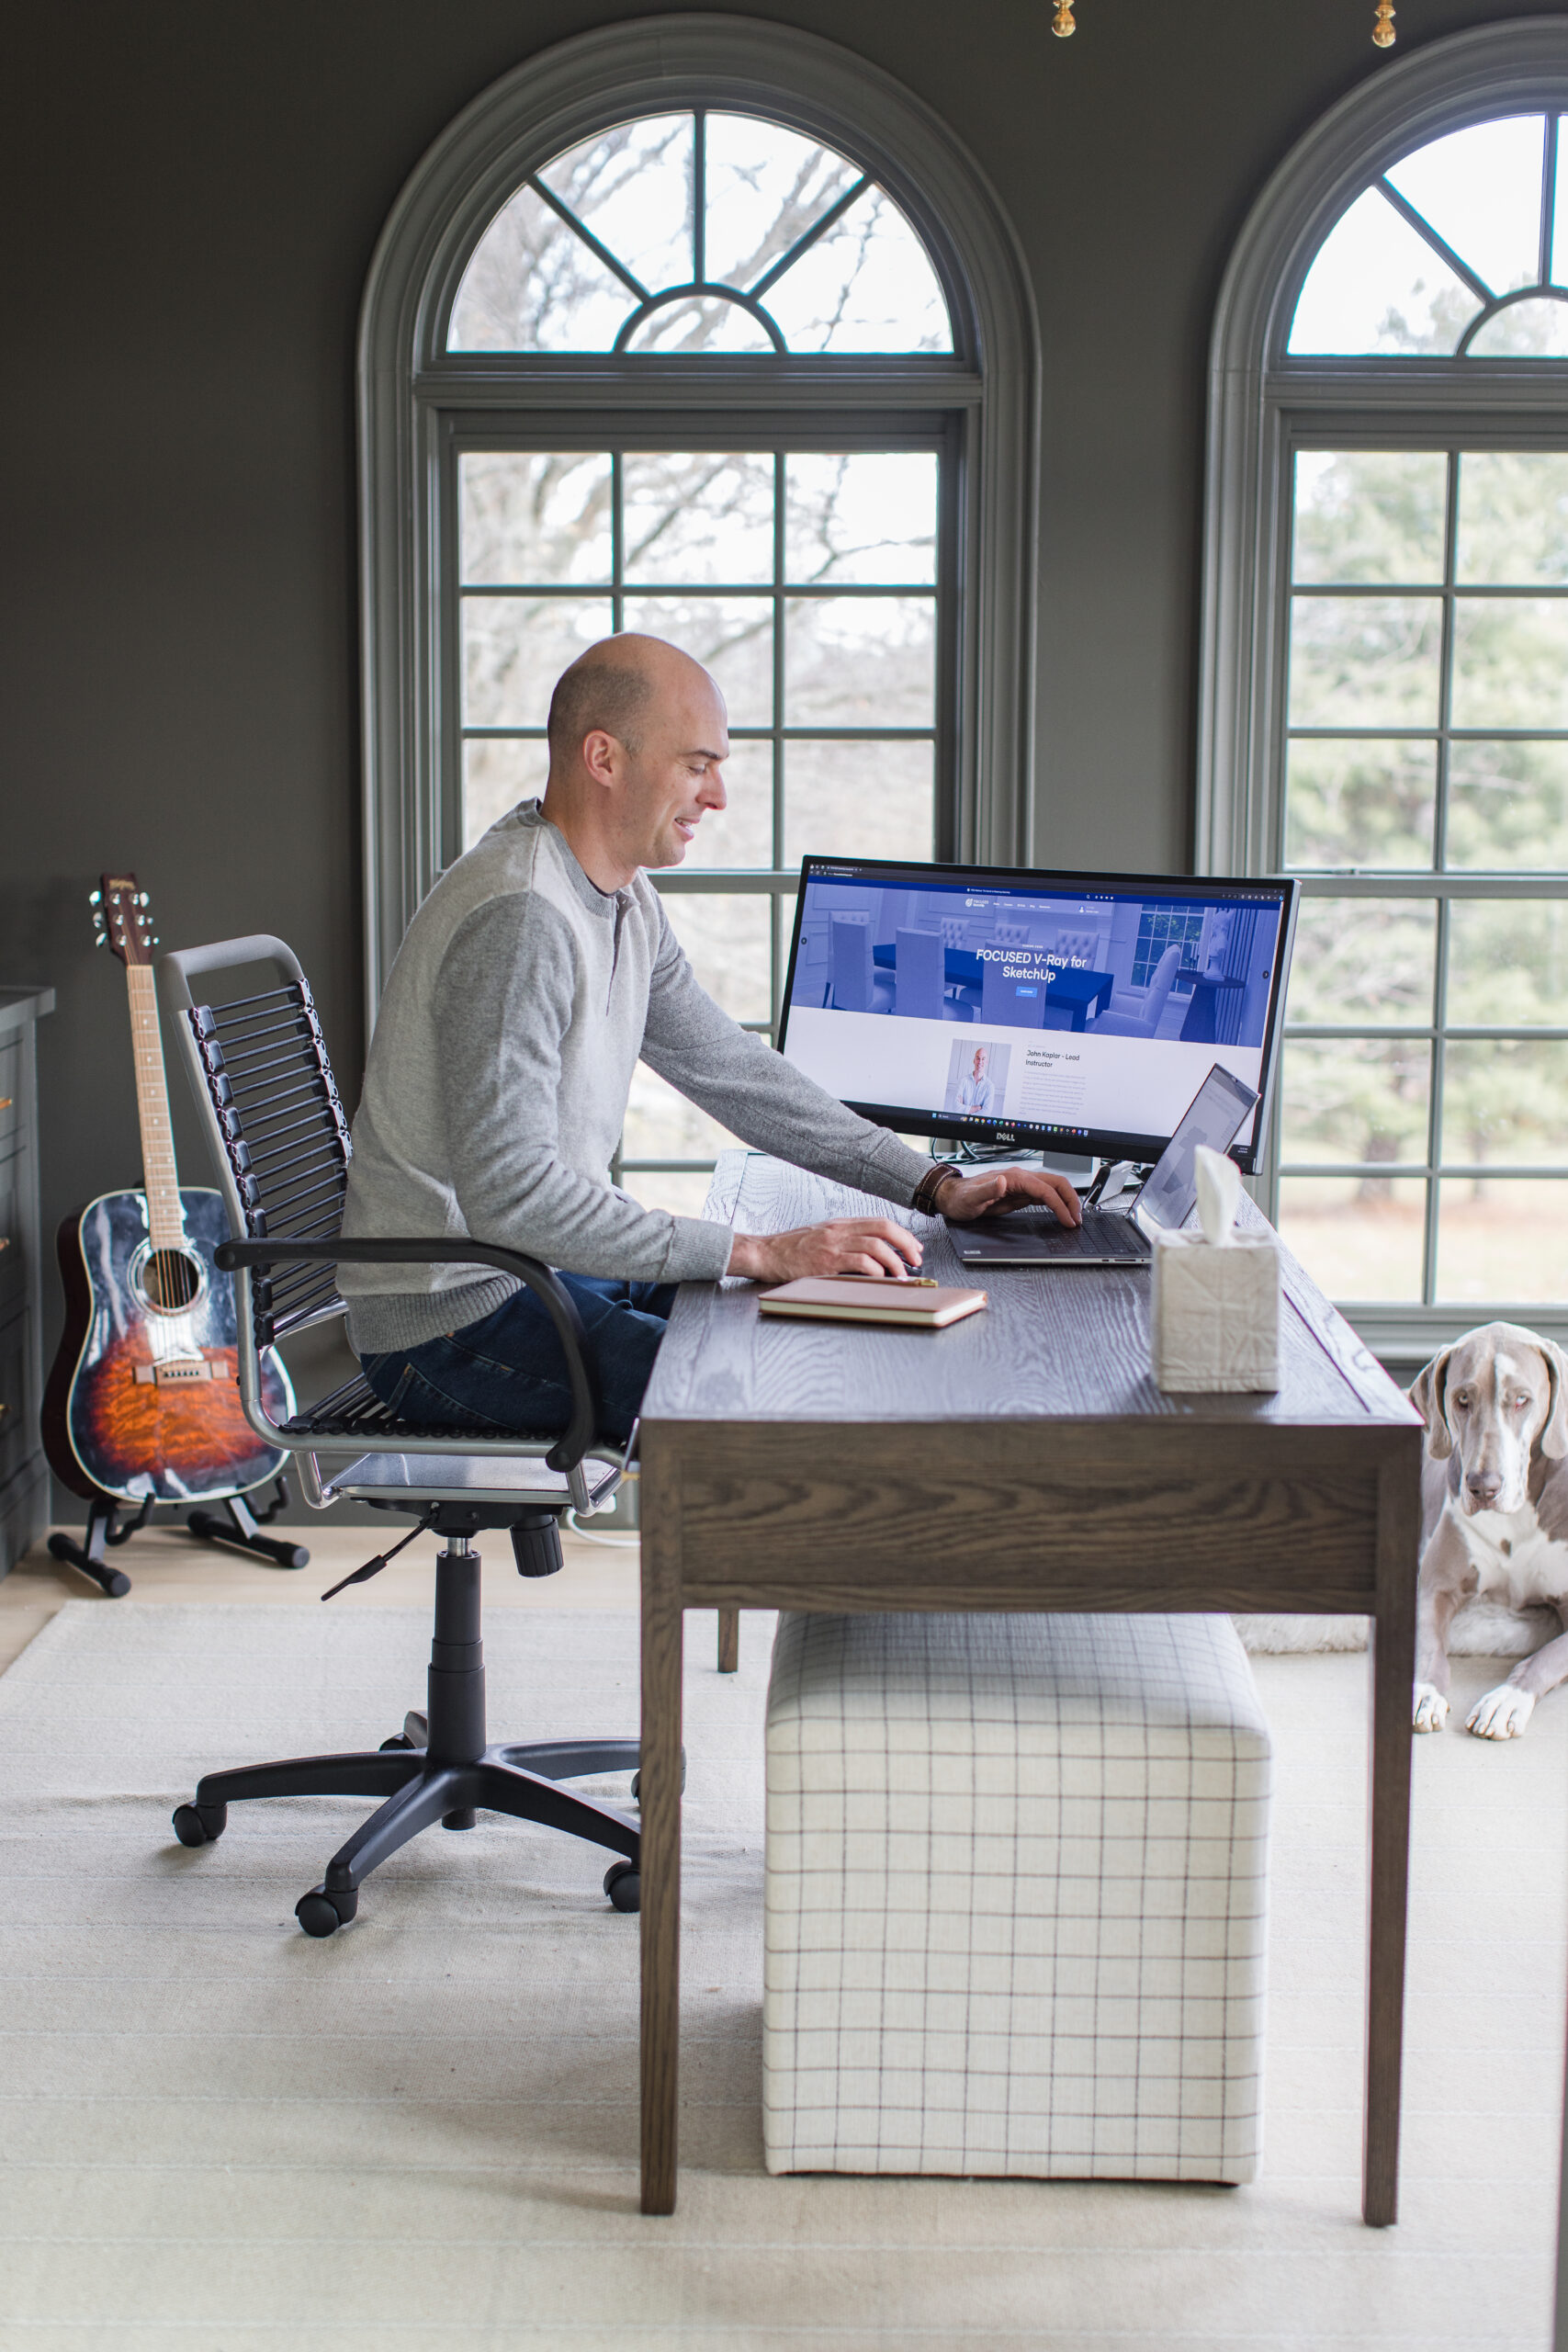 setting and achieving goals this new year home office organization | #setting #achieving #goals #home #homeoffice #organization #desktop #accessories #notebook #homeoffice #remote #workfromhome